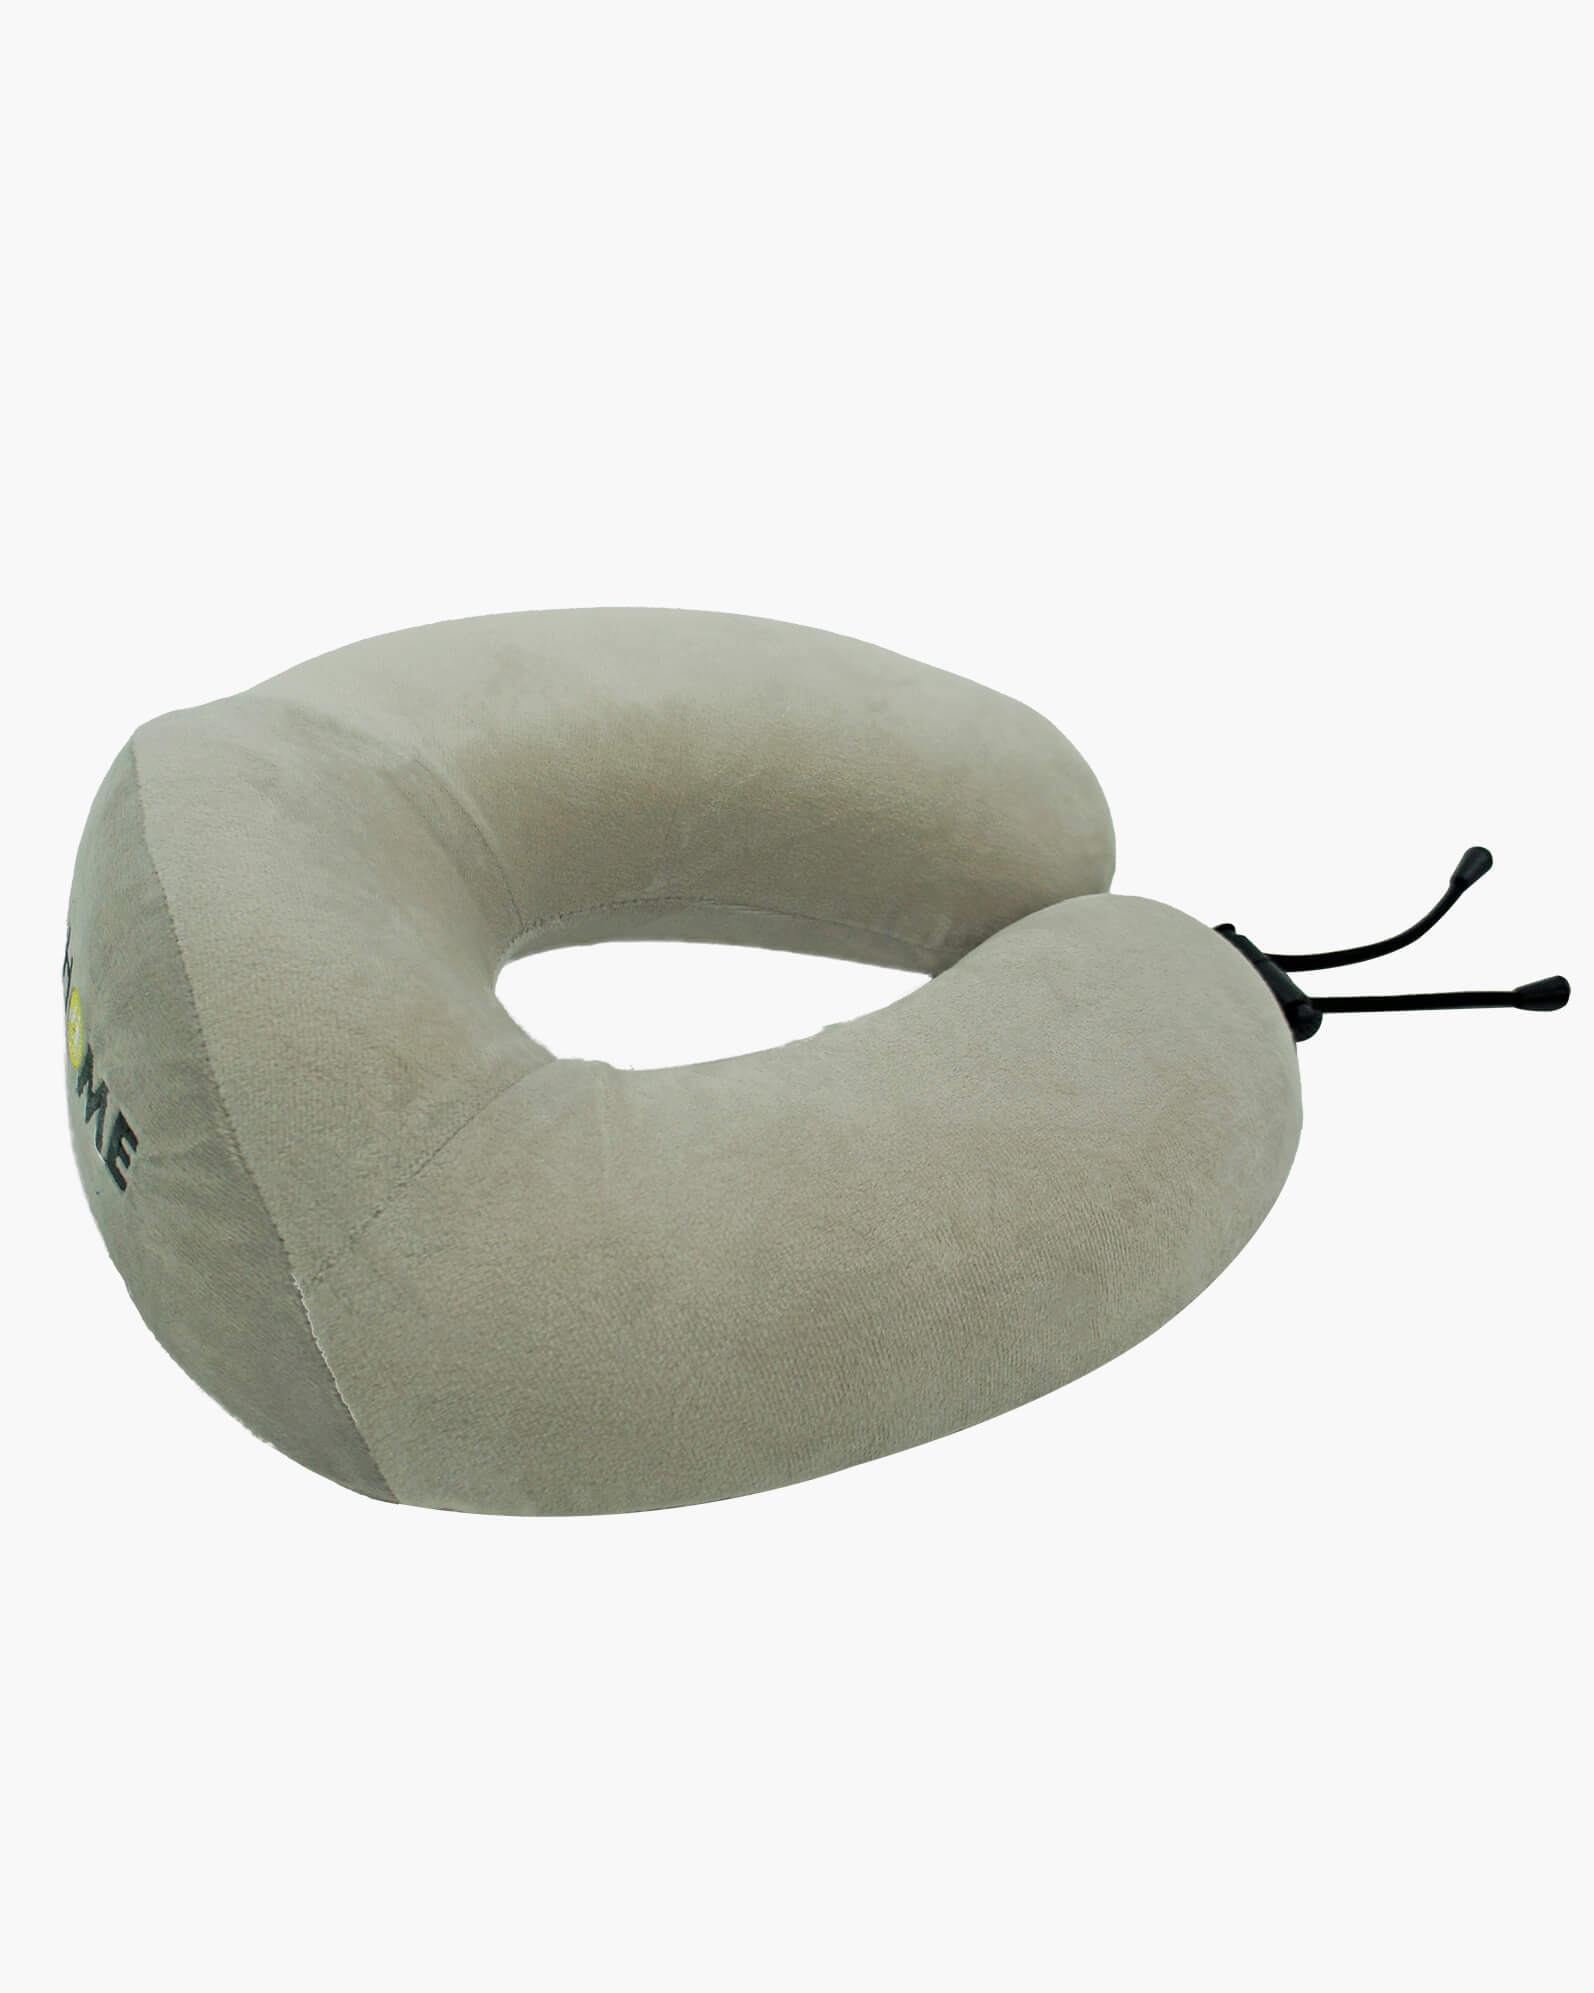 Ortho Care Neck Pillow - Premium Medical Comfort and Neck Support